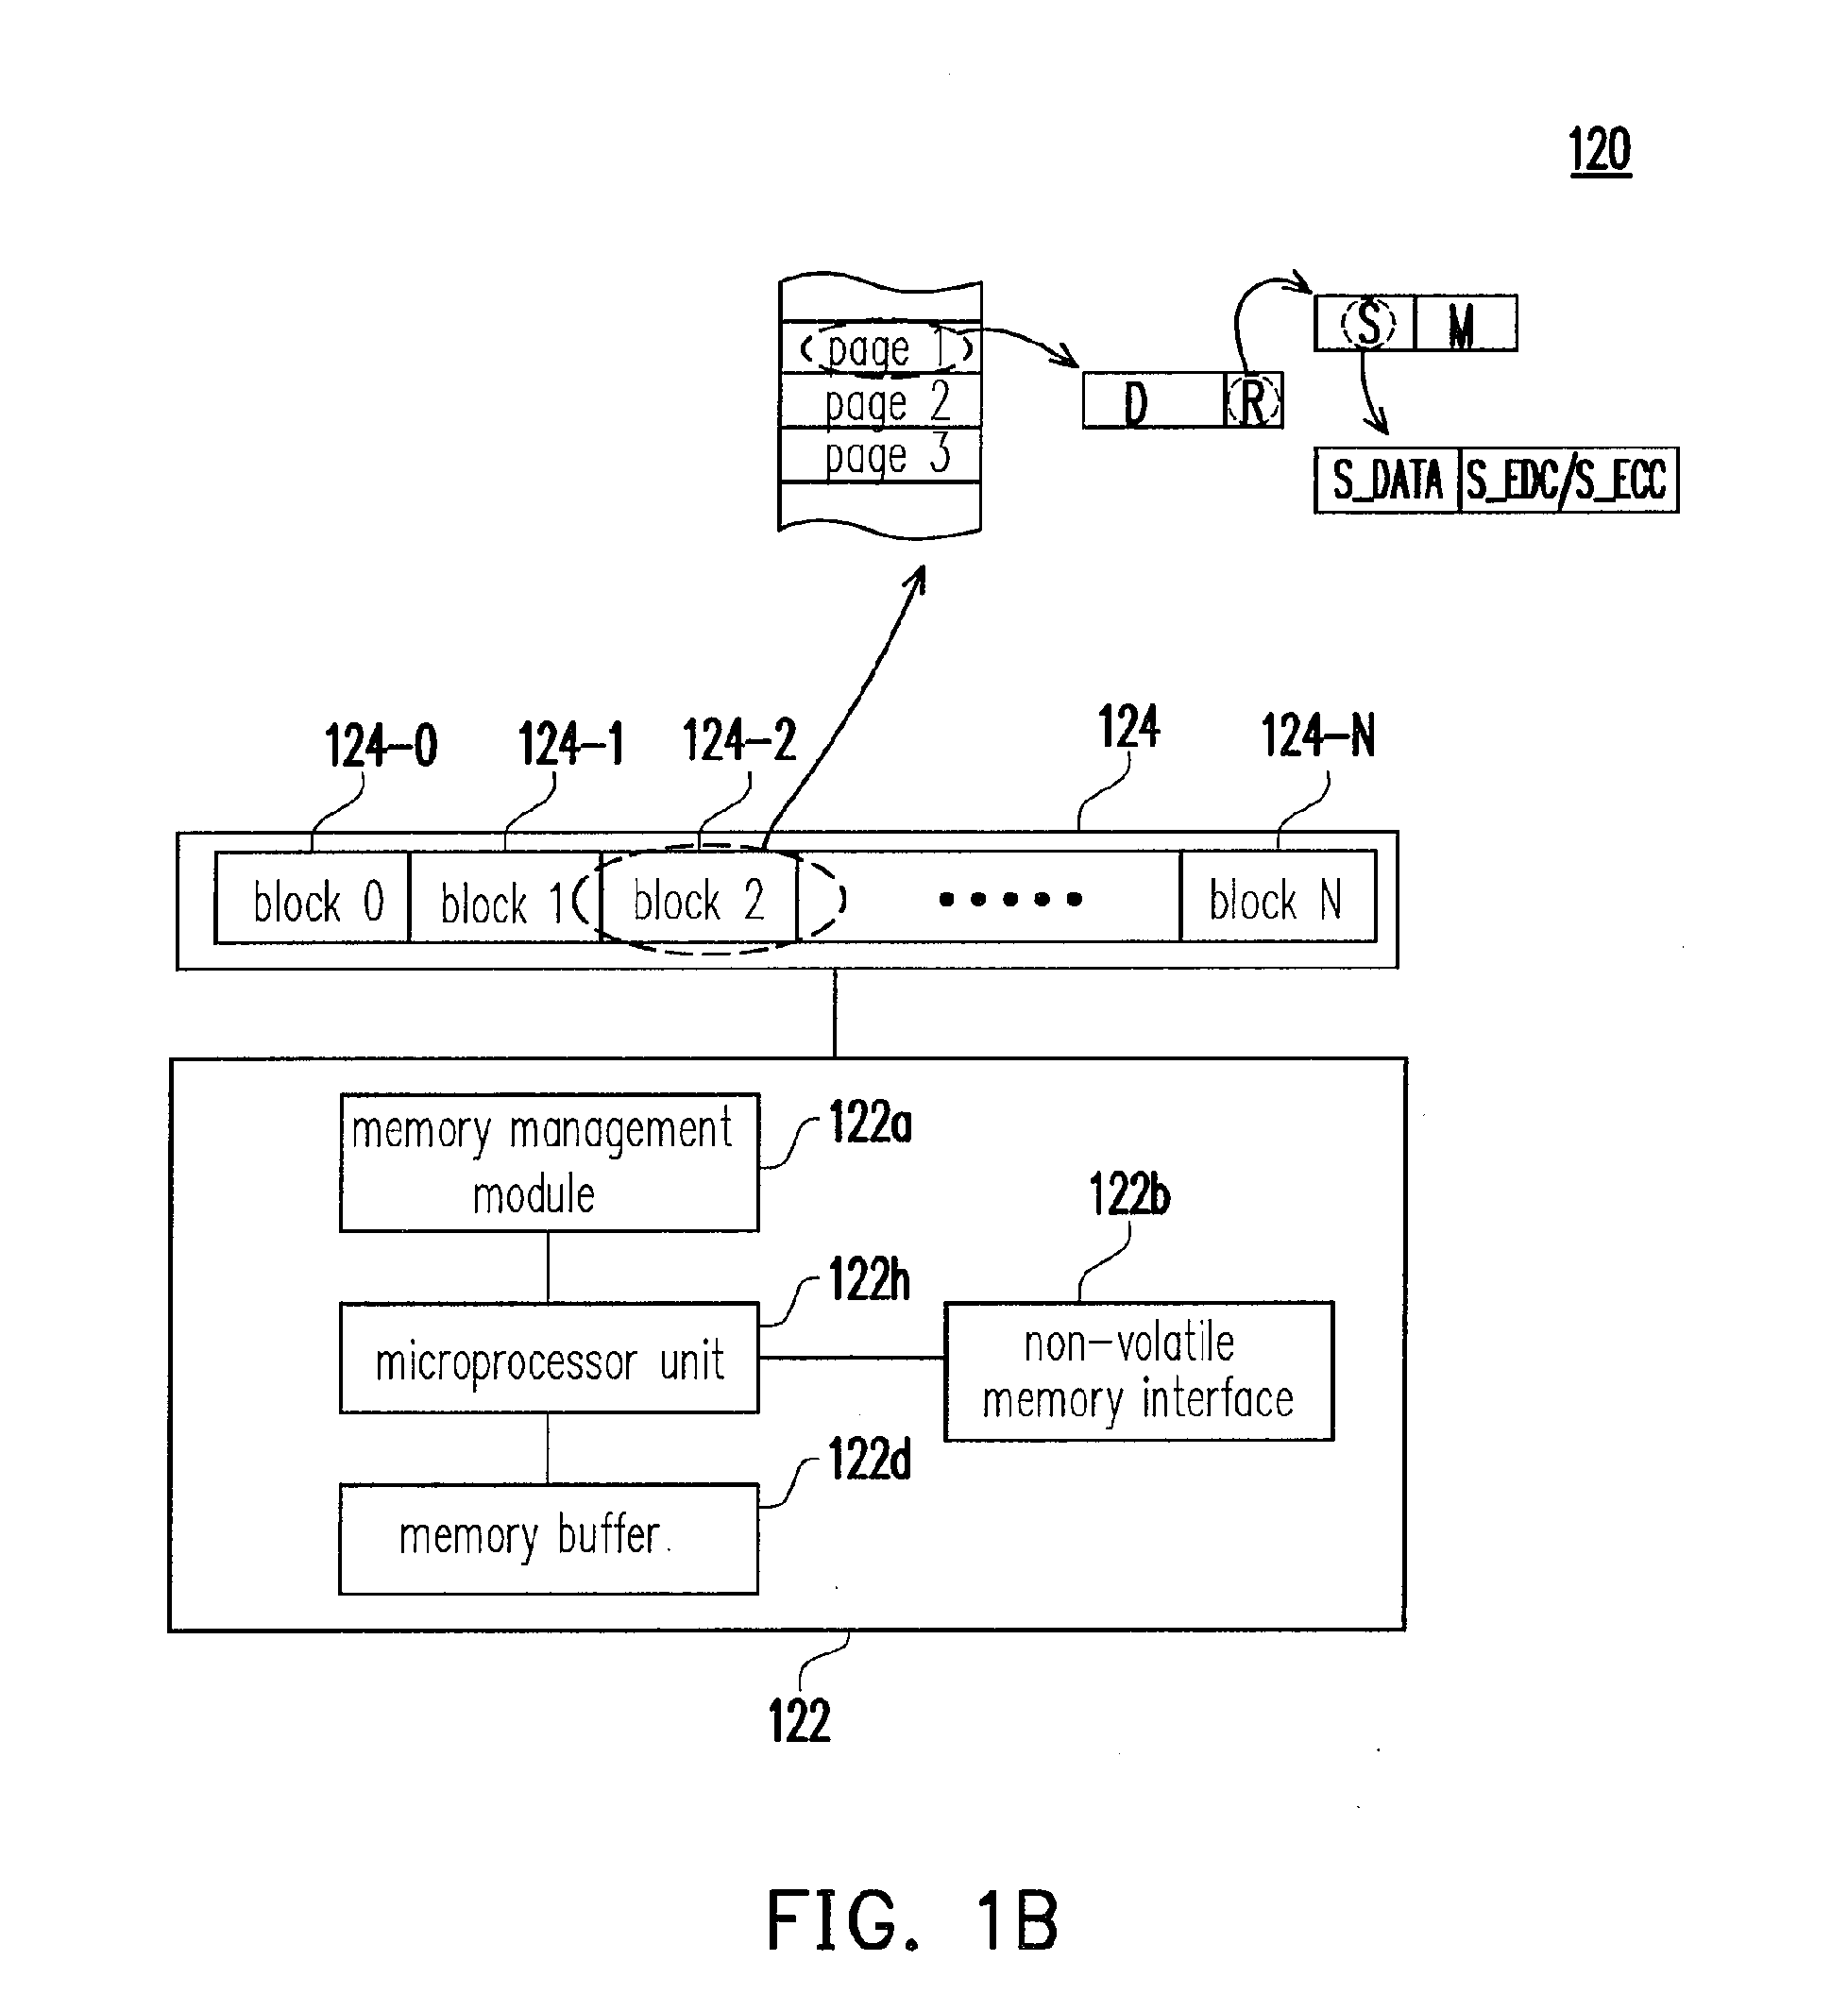 Memory management method and controller for non-volatile memory storage device